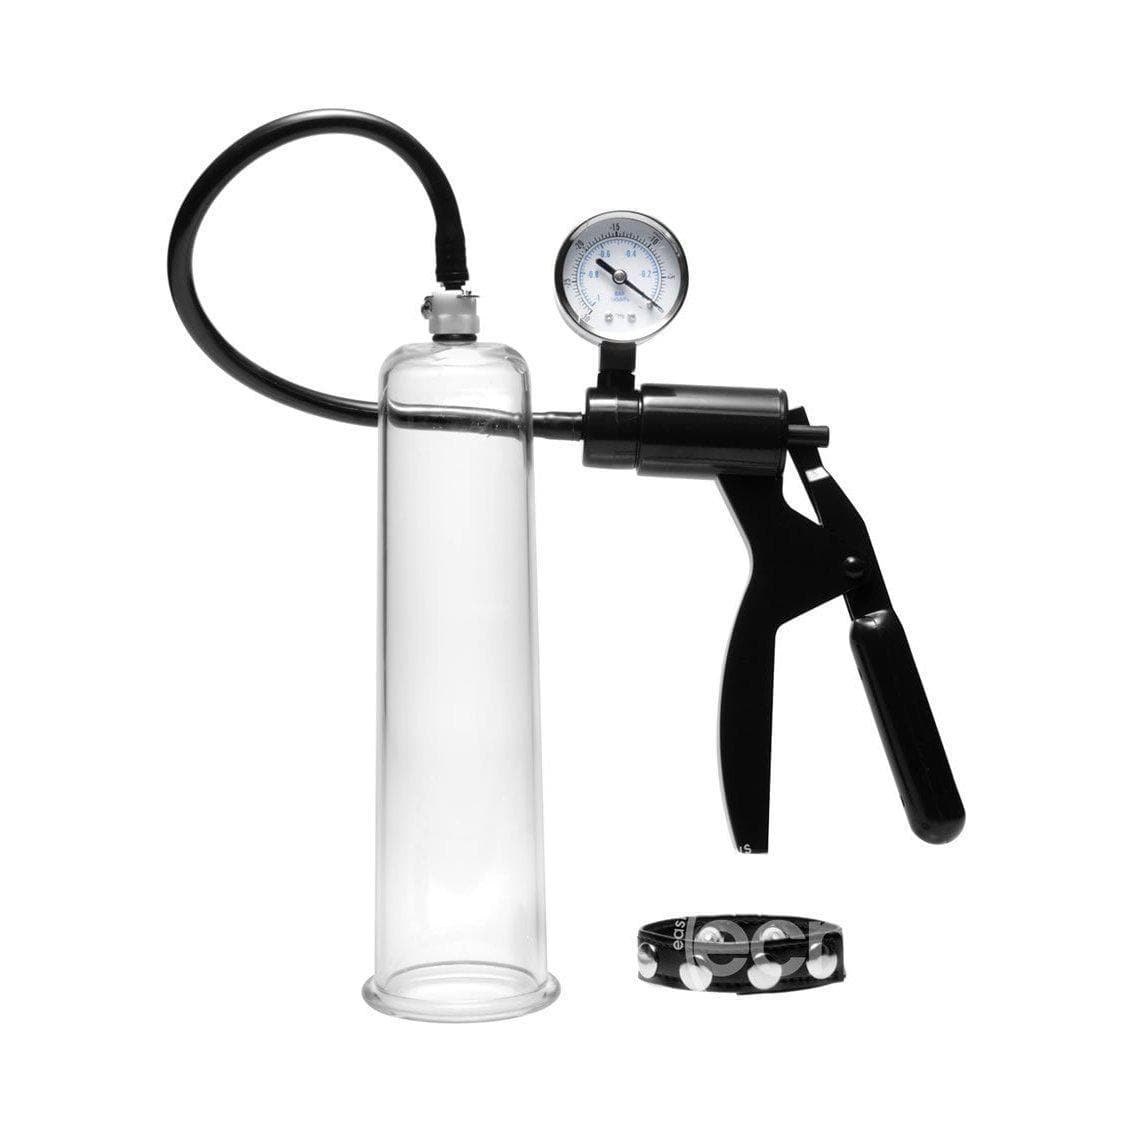 Size Matters Advanced Penis Pump Kit 2.25 Inch Wide - Romantic Blessings